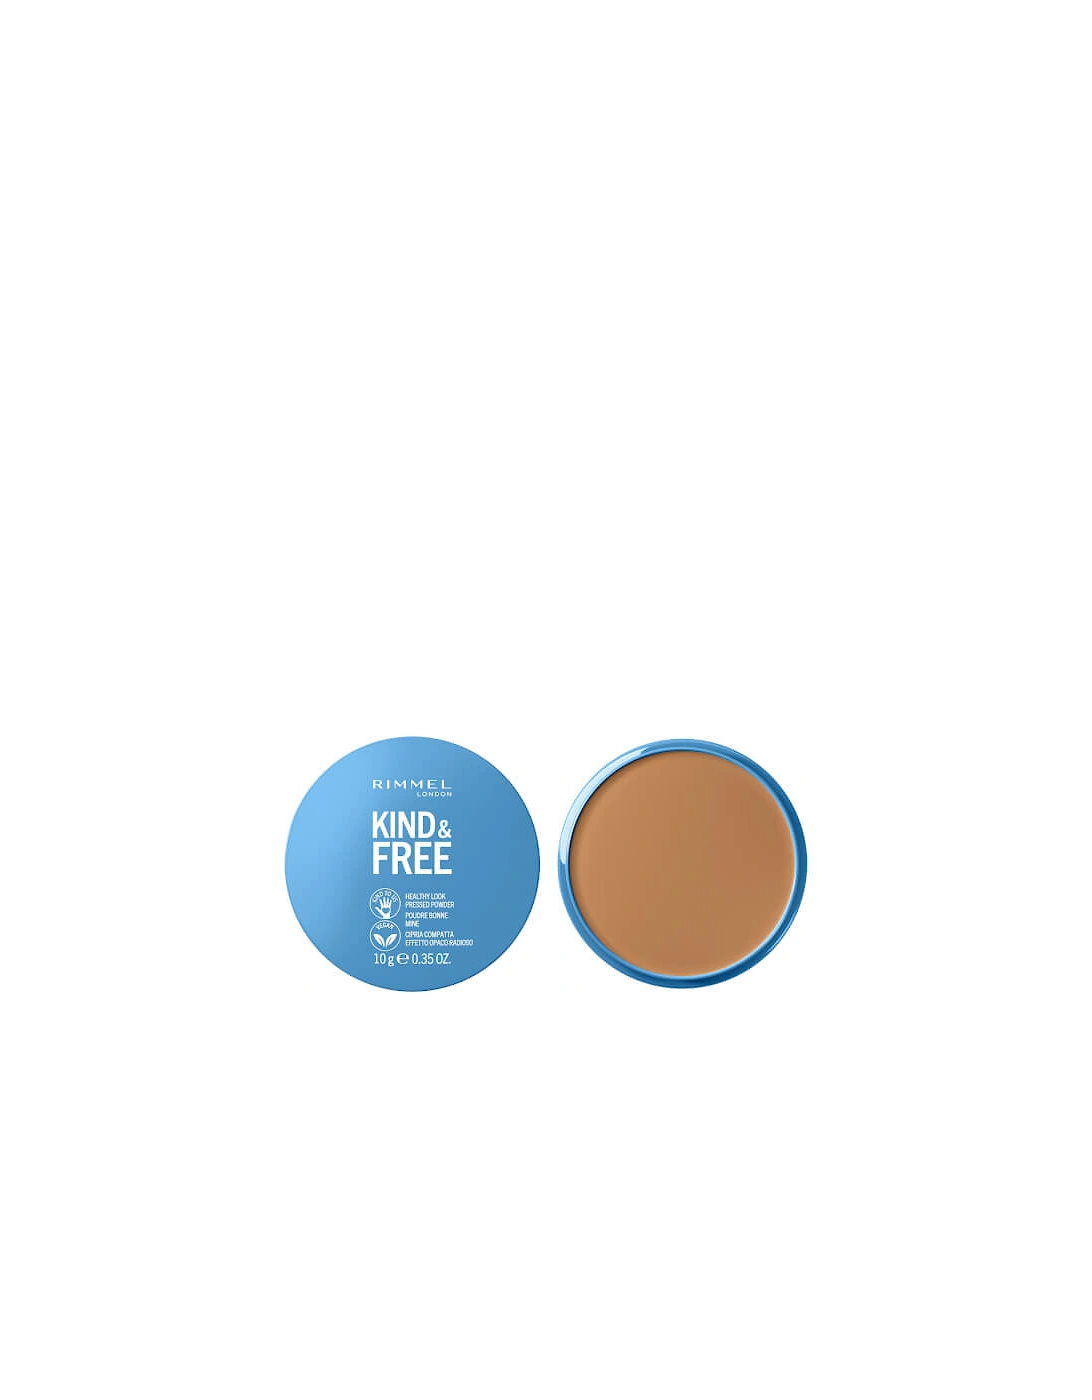 Kind and Free Pressed Powder - Tan, 2 of 1